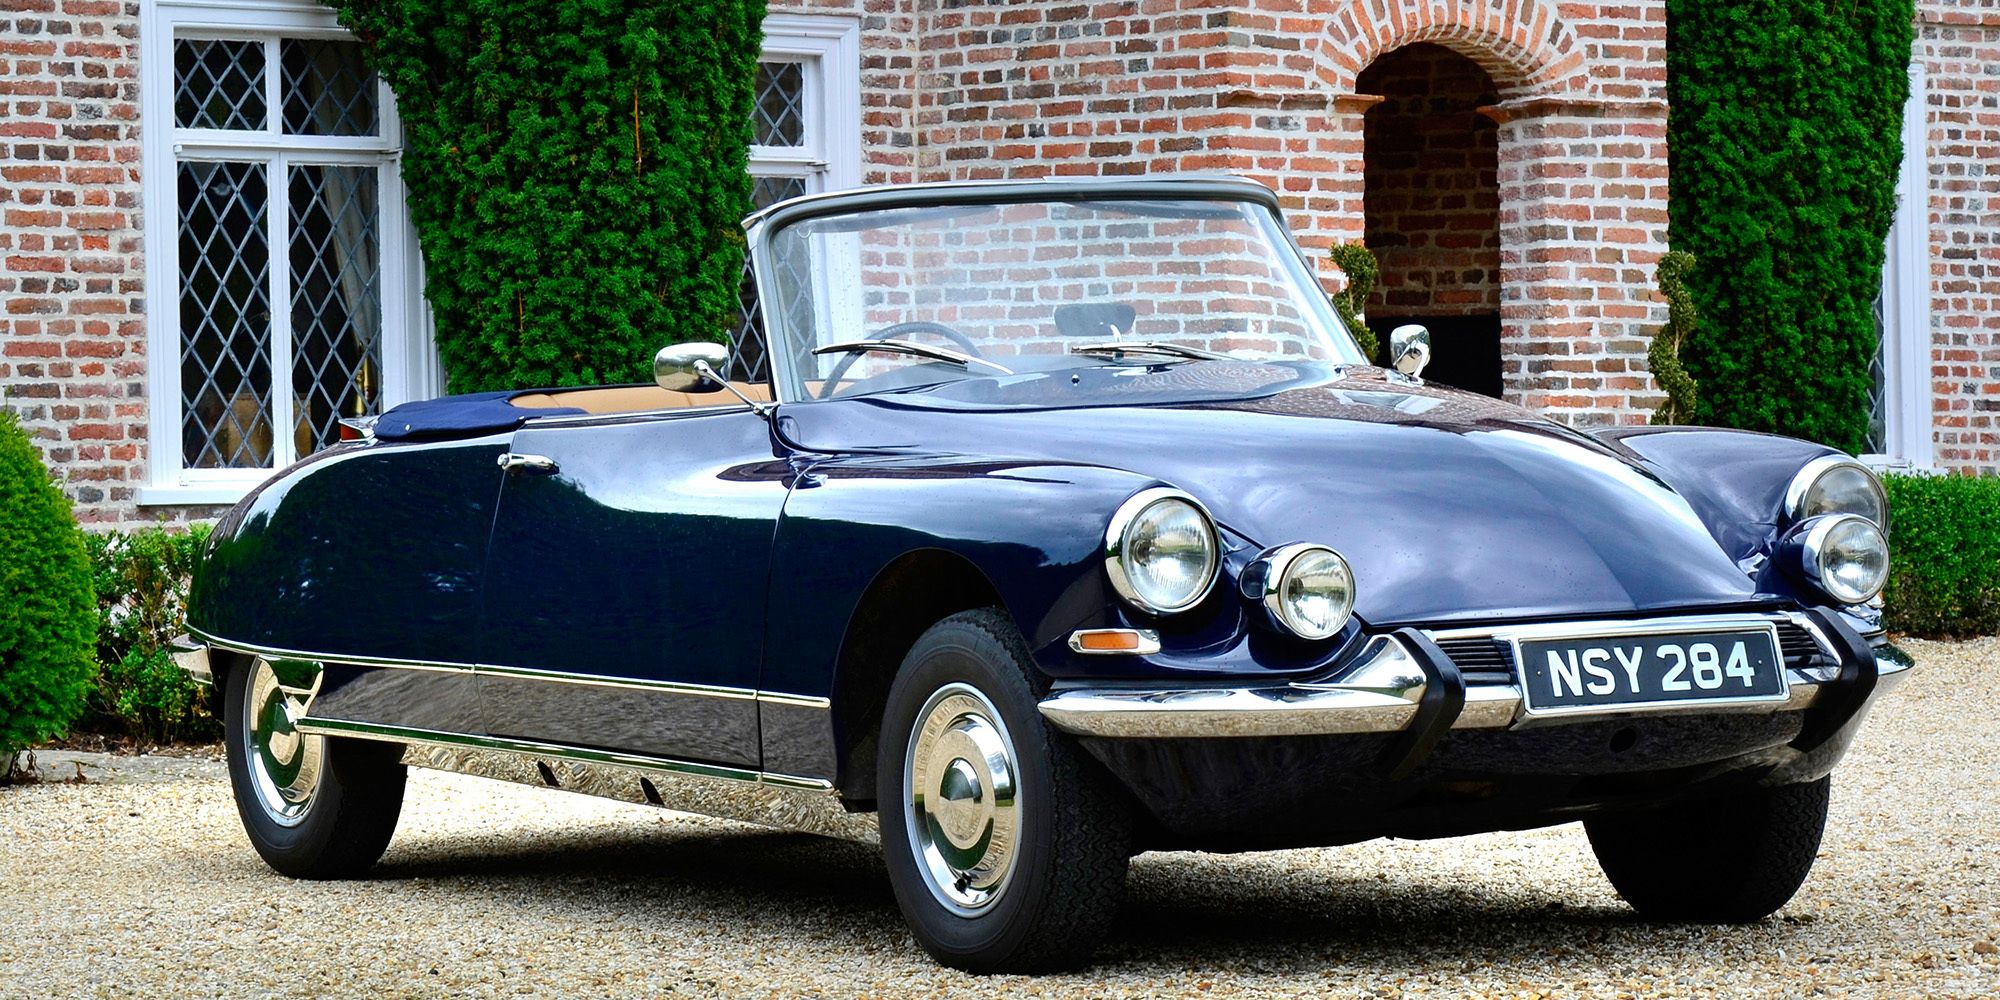 The front of a dark blue DS Cabriolet